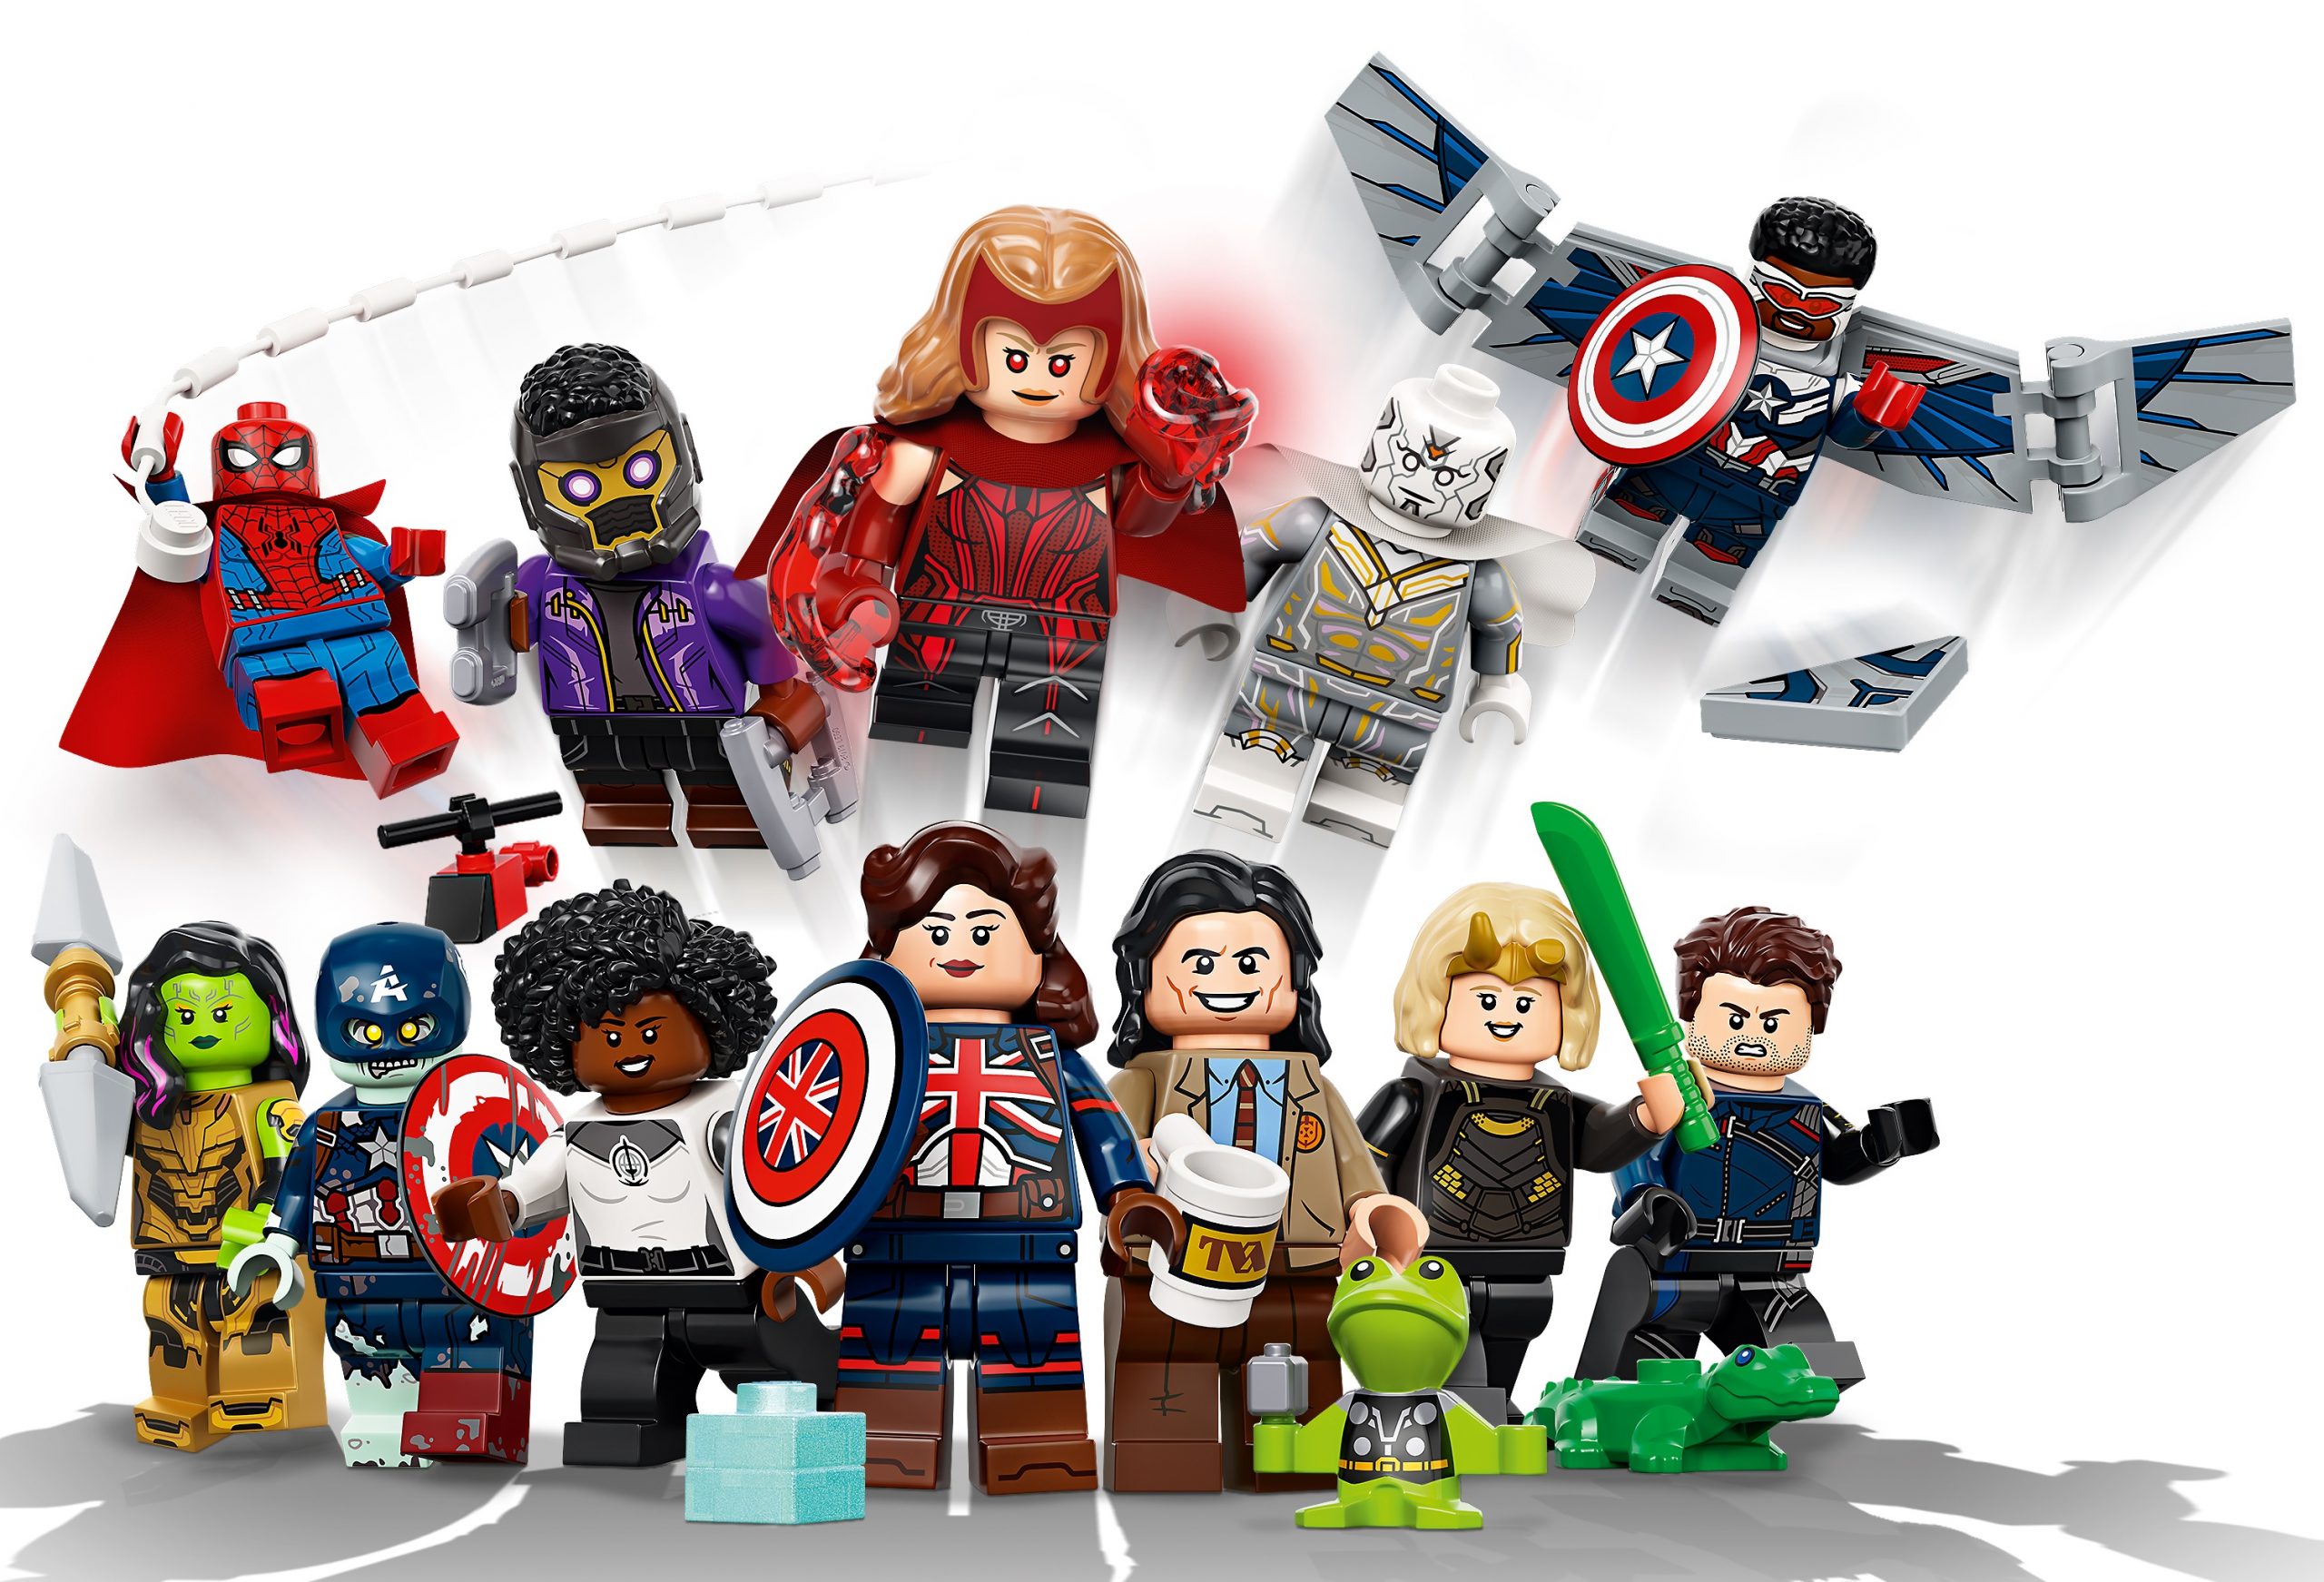 LEGO Marvel Collectible Minifigures (71031) Officially Revealed The